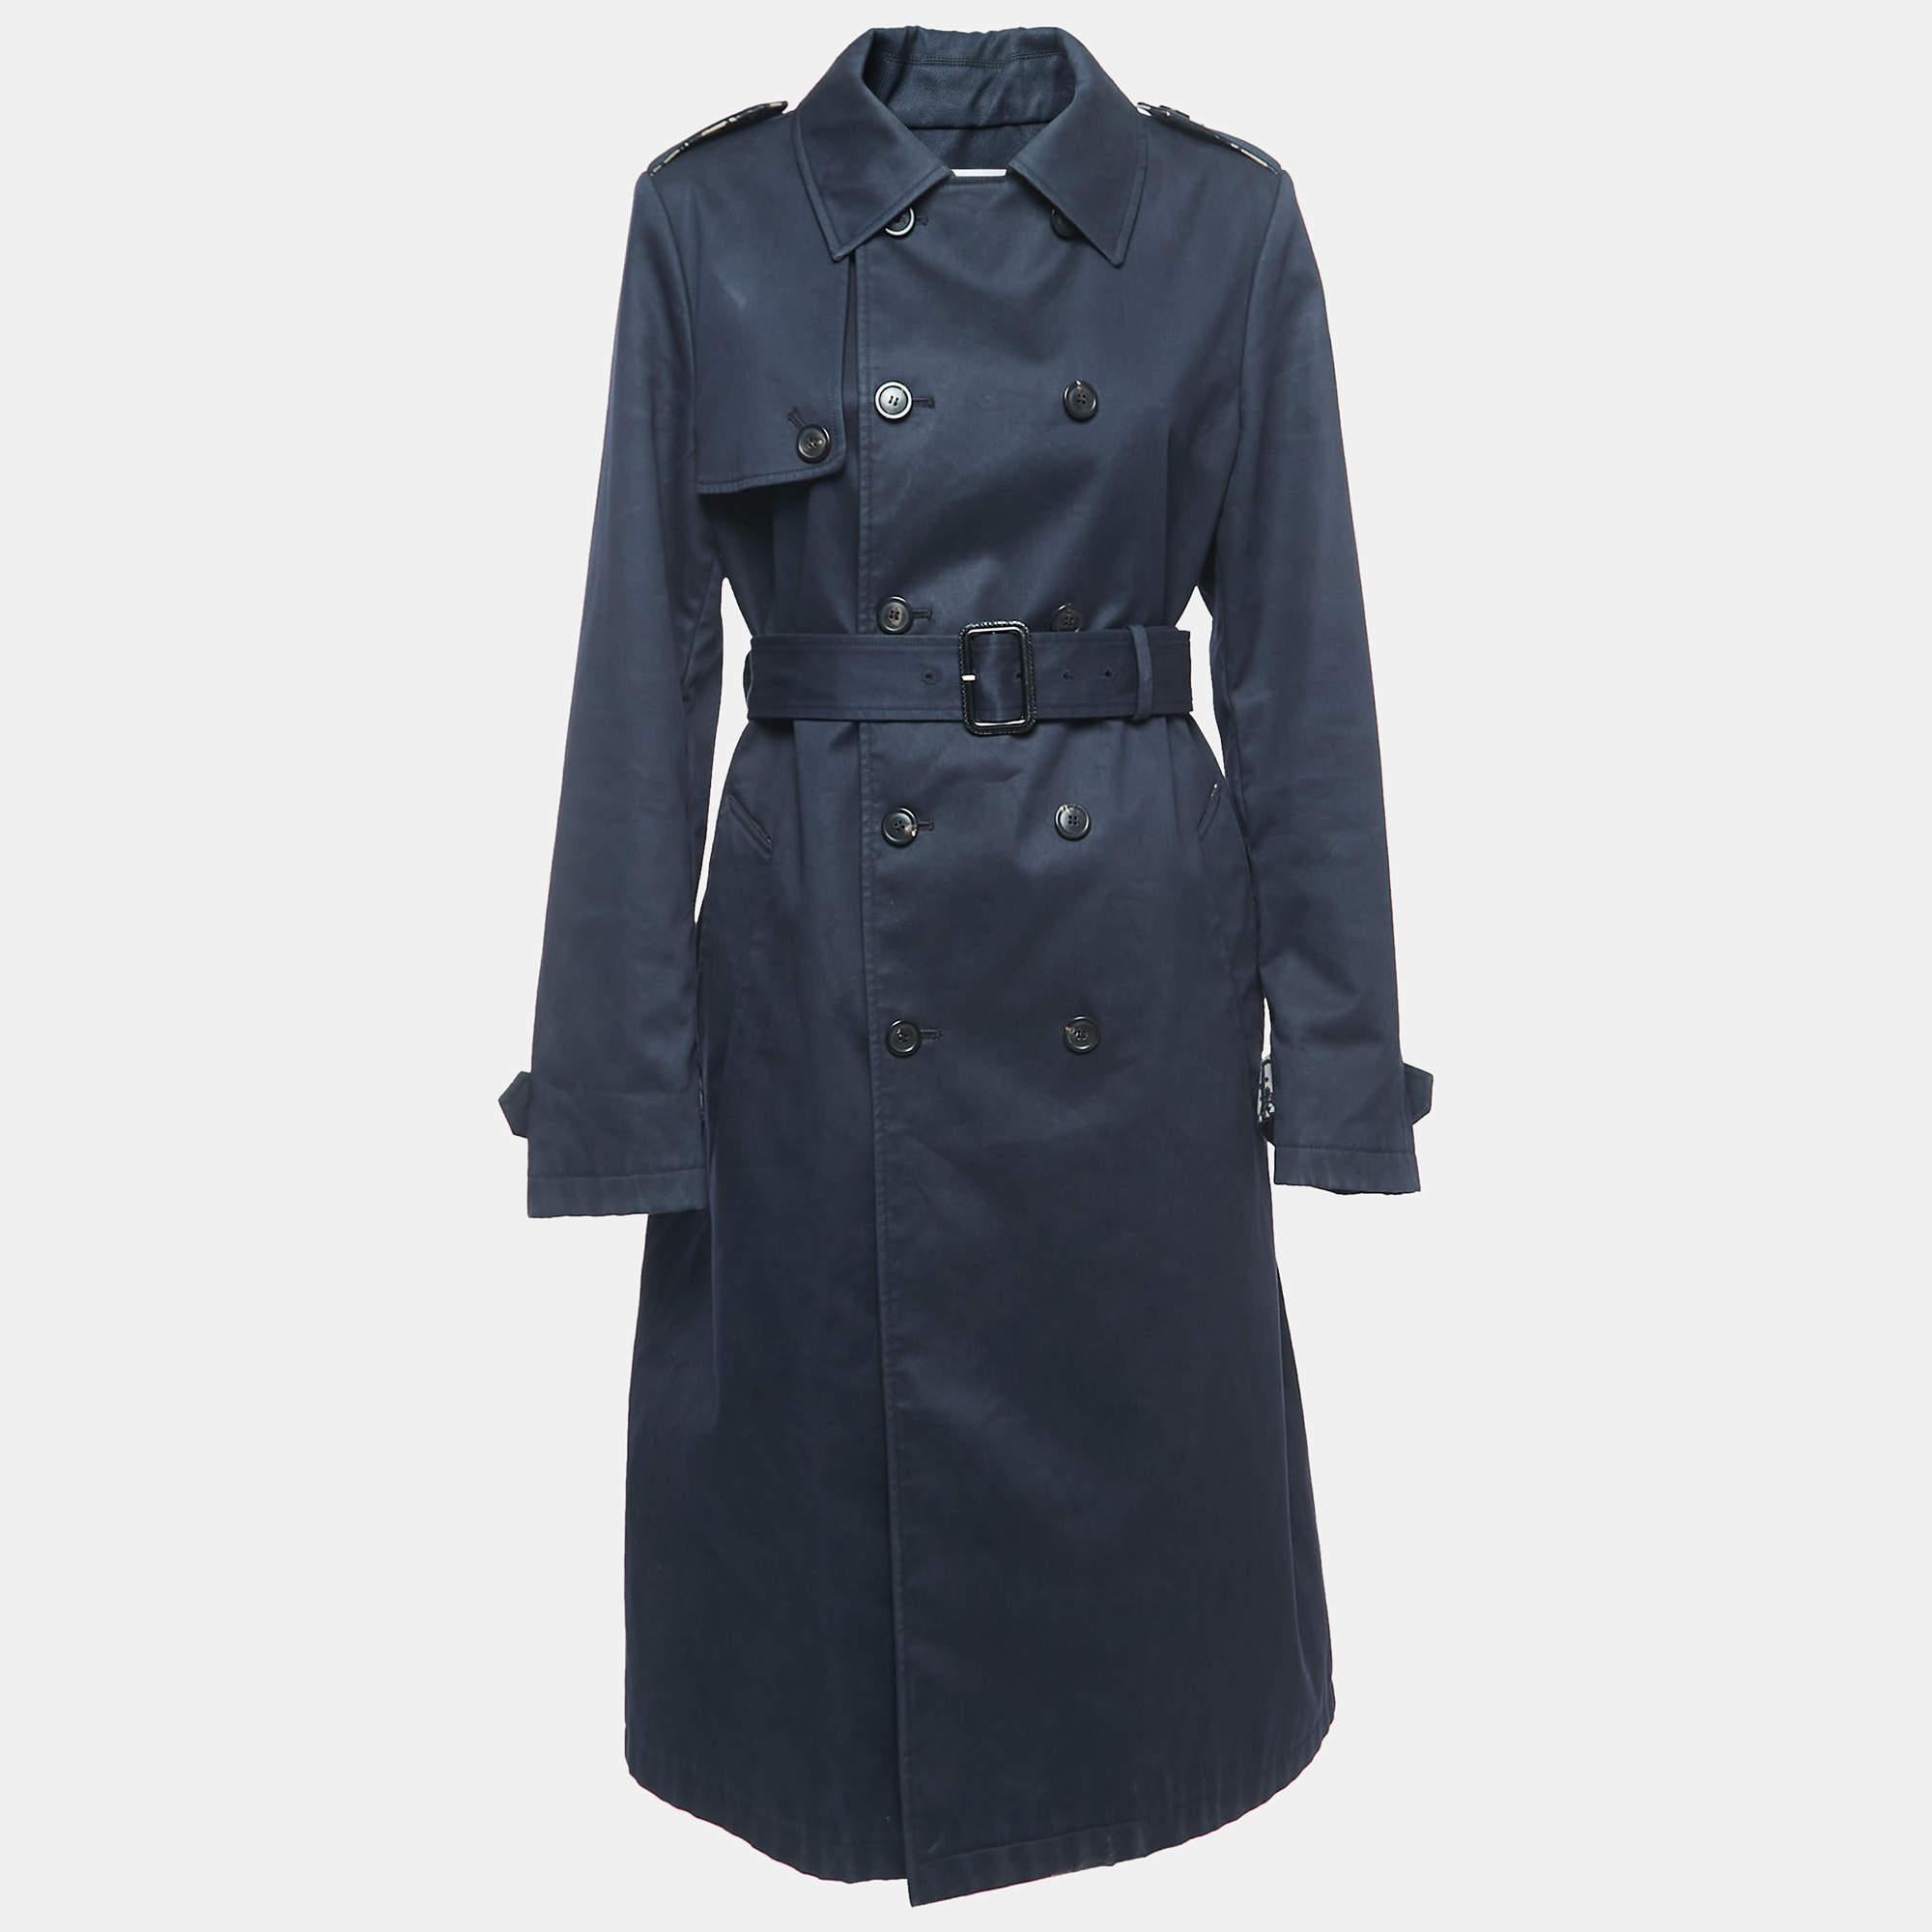 Let this Dior trench coat be your style companion for chilly days. Crafted with precision from the finest materials, it showcases the epitome of craftsmanship and style, making a timeless statement in any wardrobe.

